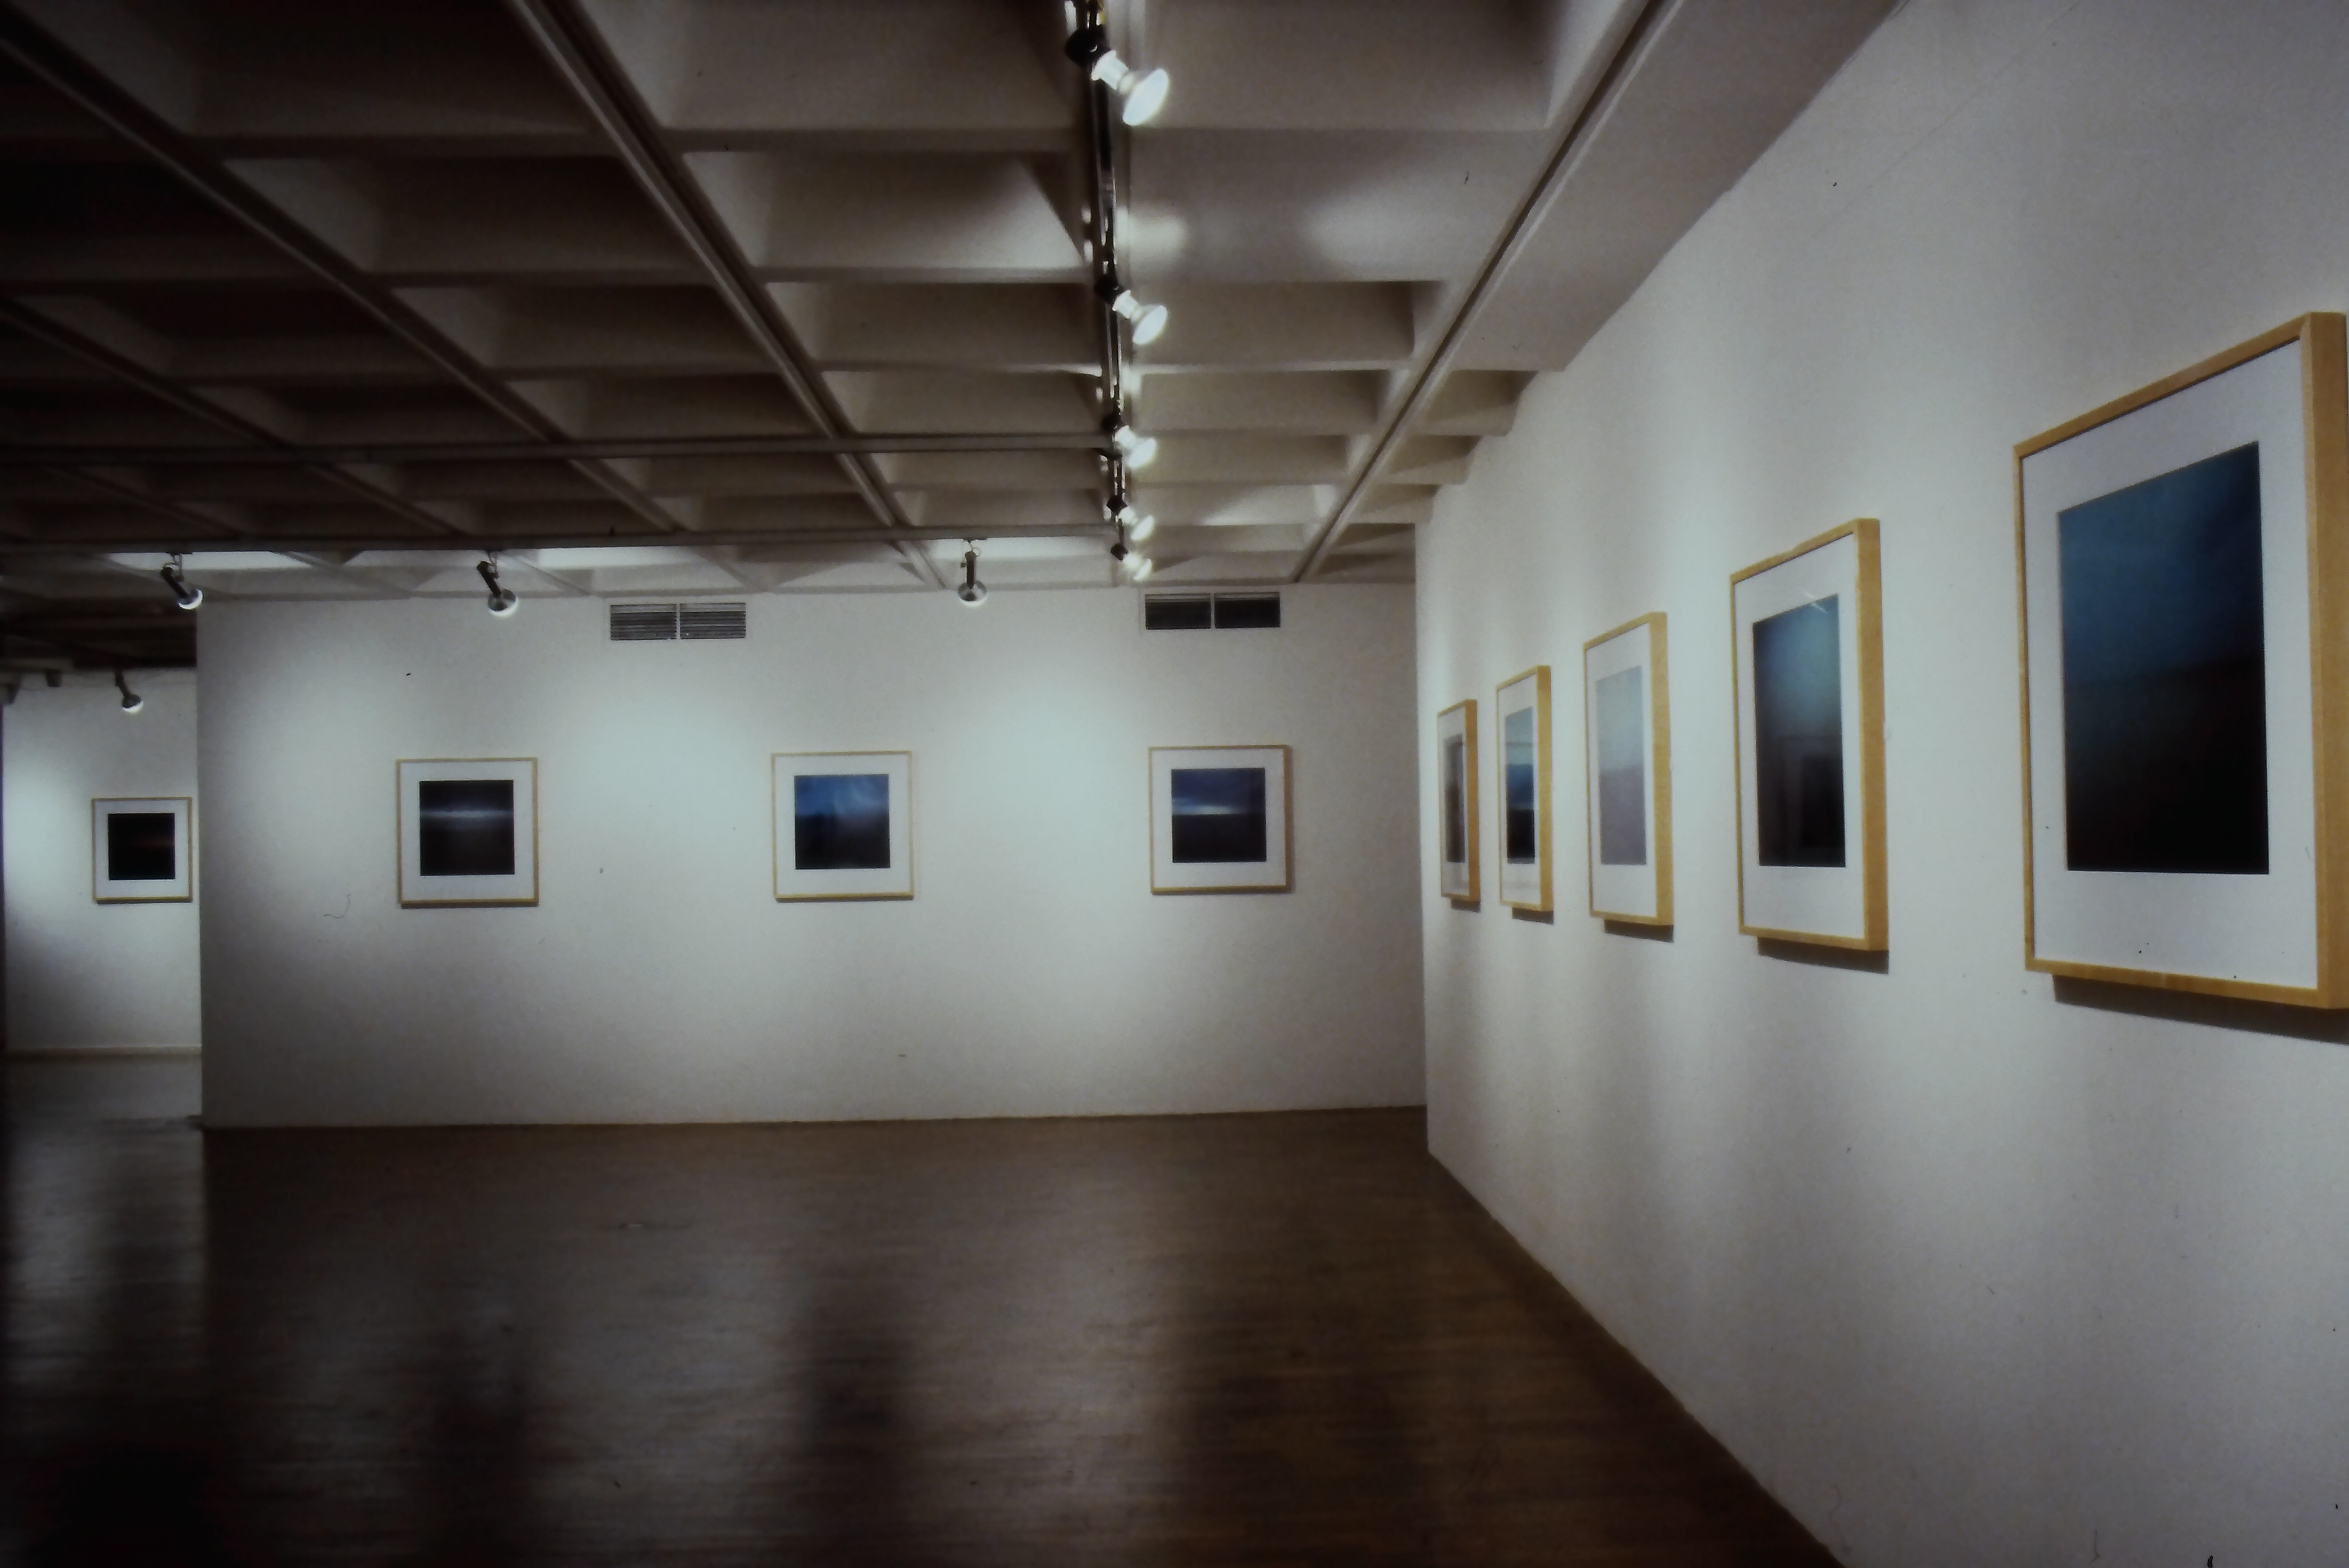 Photographic slide from Arnolfini's 1997 exhibition of Garry Fabian Miller's series Sections of England: The Sea Horizon 1976/77 